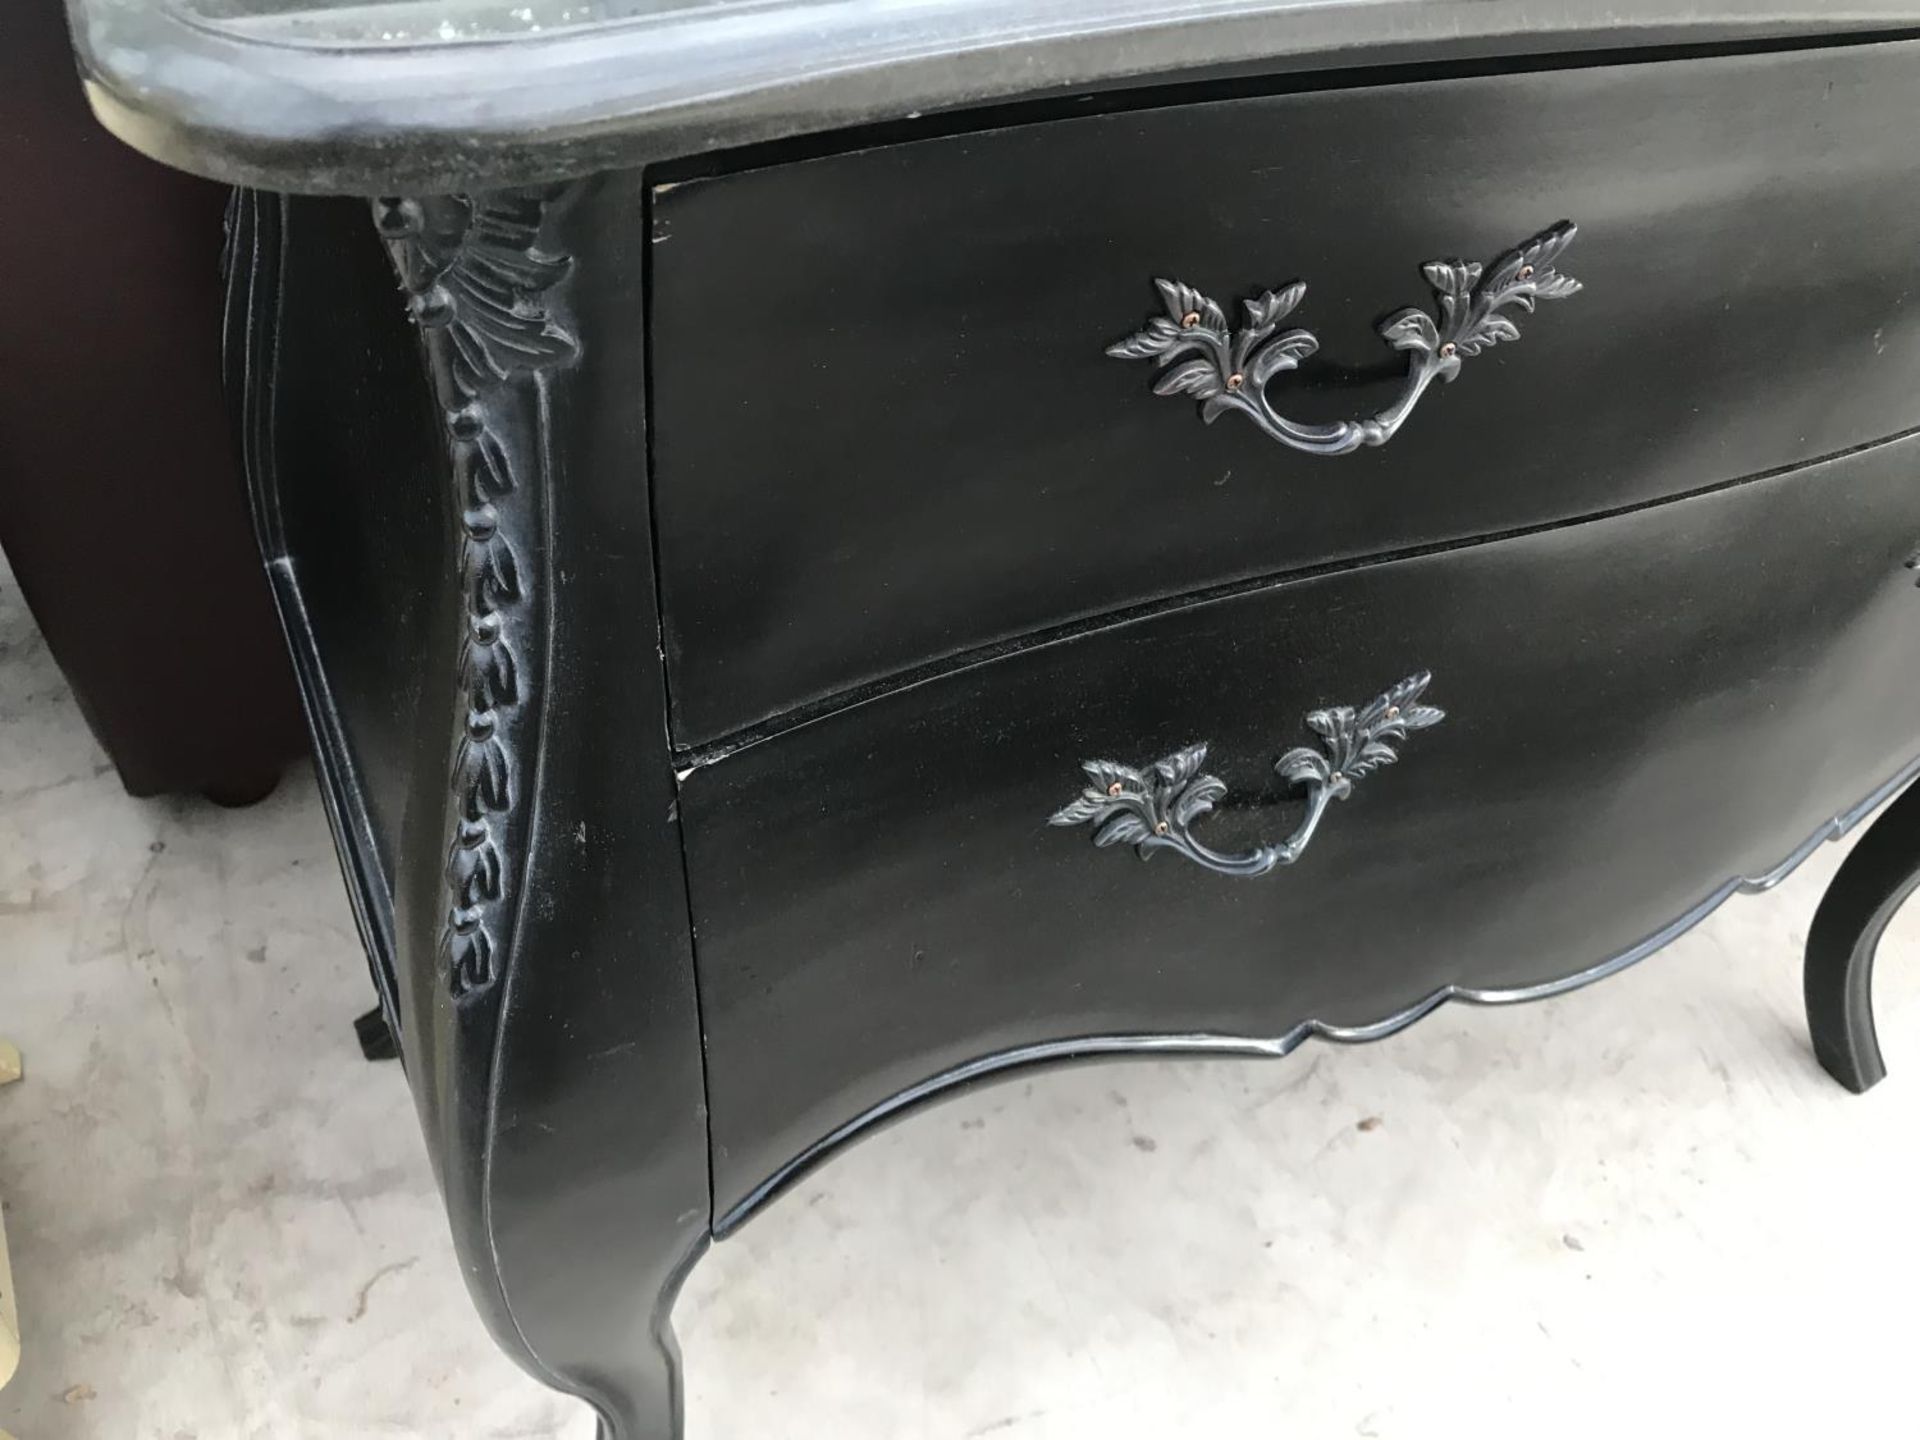 A BLACK ORNATE CHEST OF DRAWERS WITH TWO LONG DRAWERS - Image 3 of 4